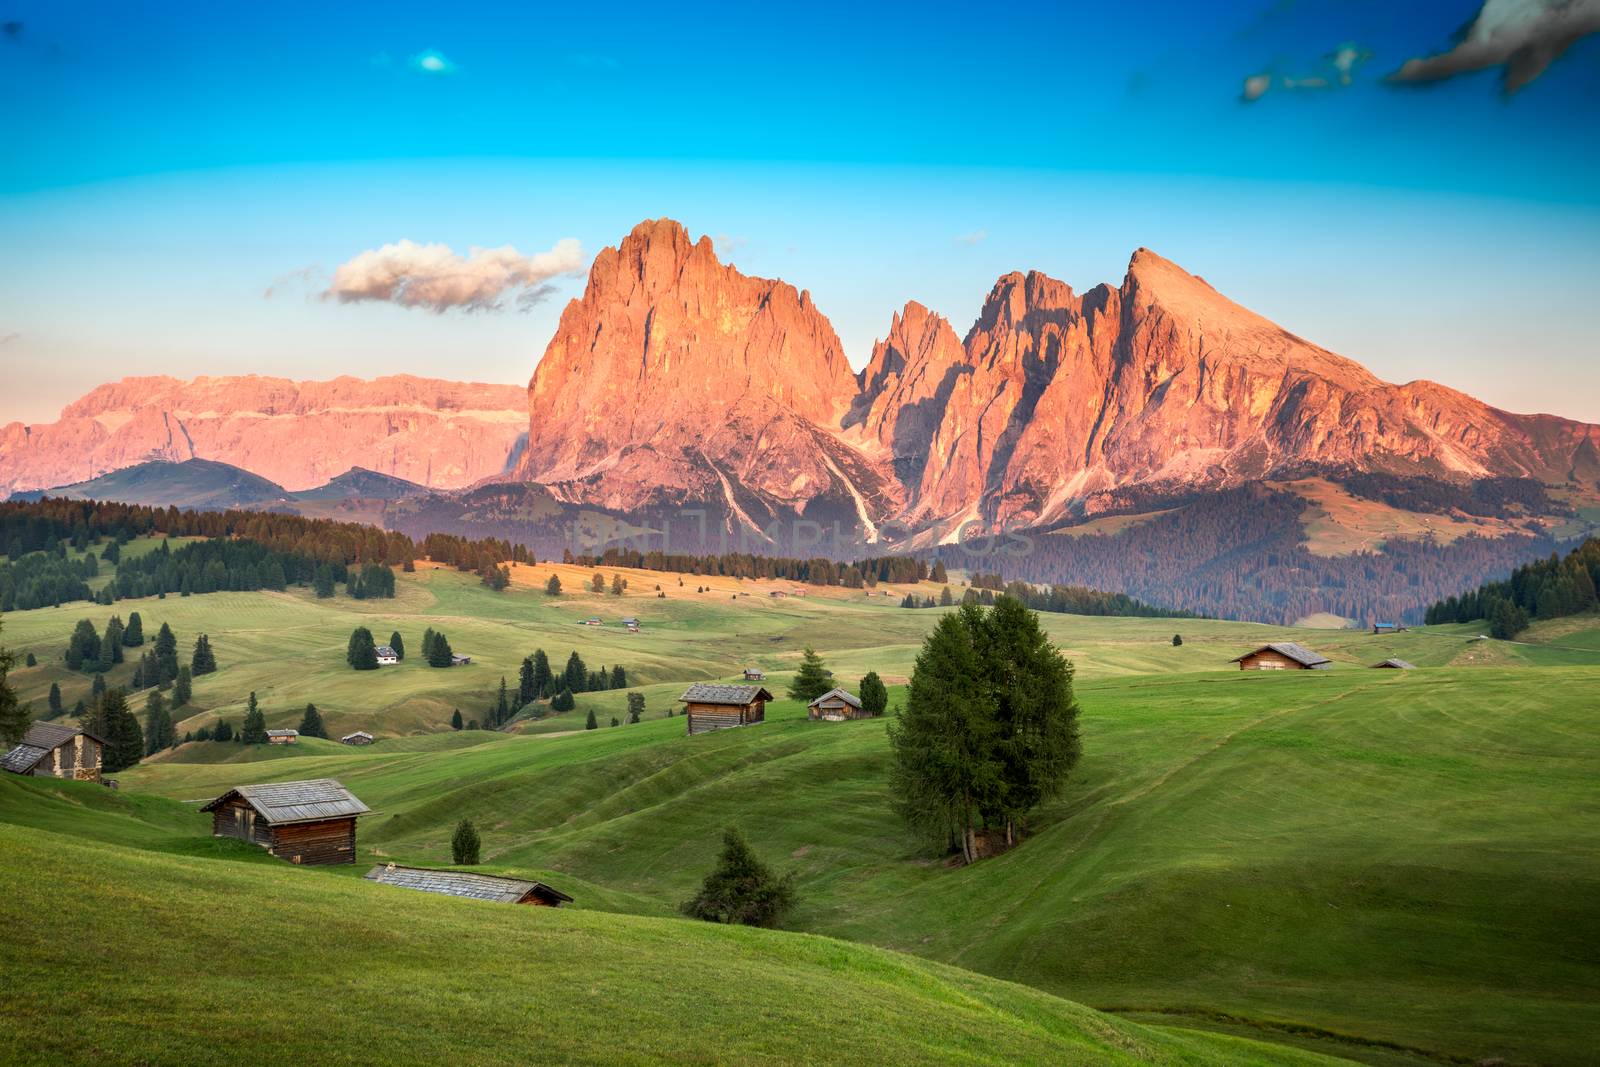 Seiser Alm with Langkofel Group in last sunlight, South Tyrol, Italy